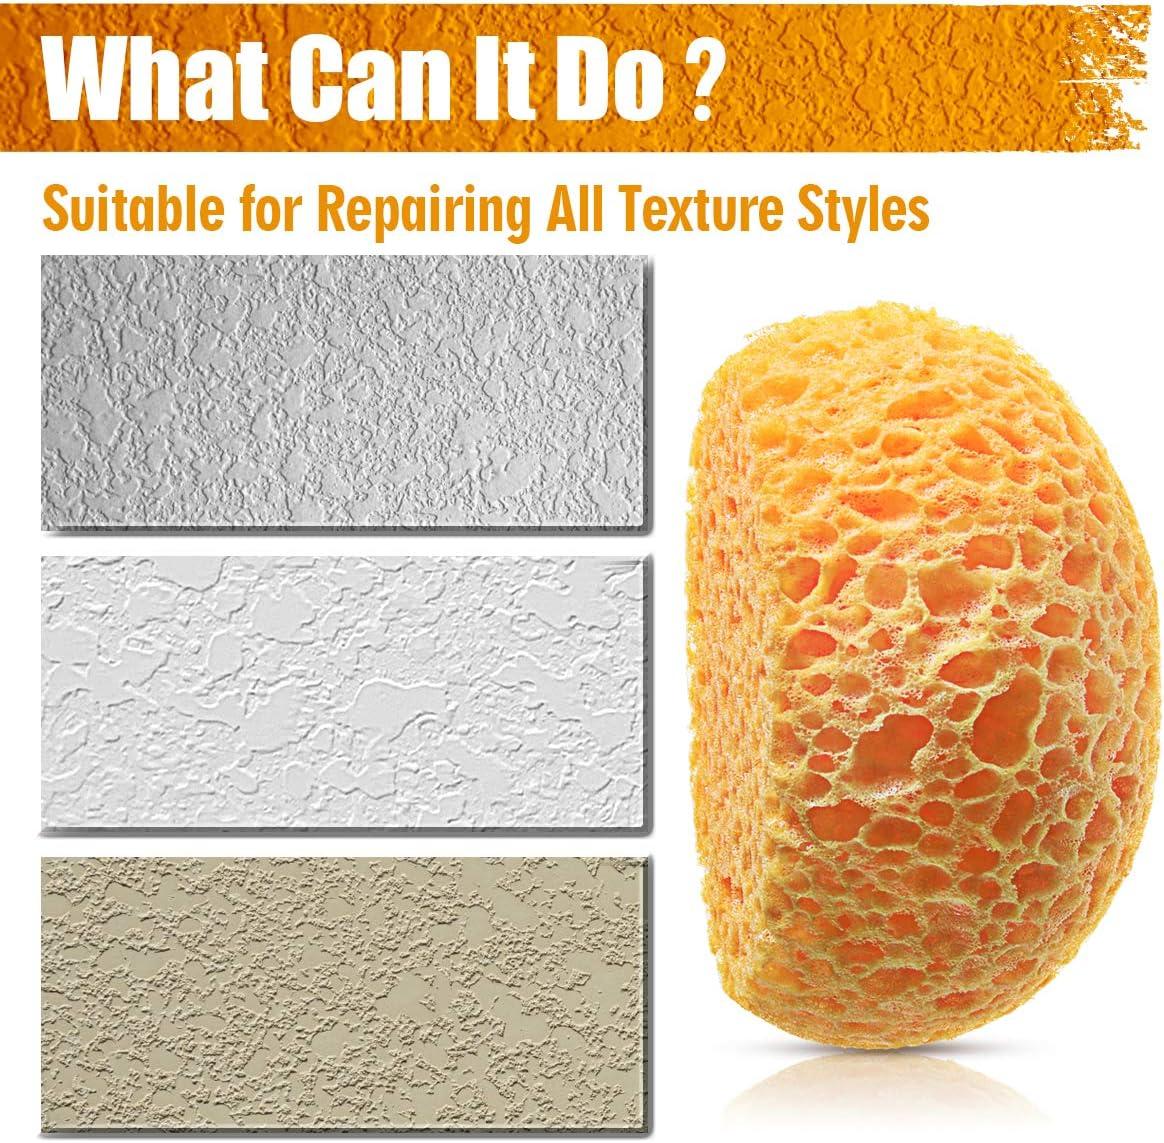 DIY- How to Match Knockdown texture with the Knockdown Texture